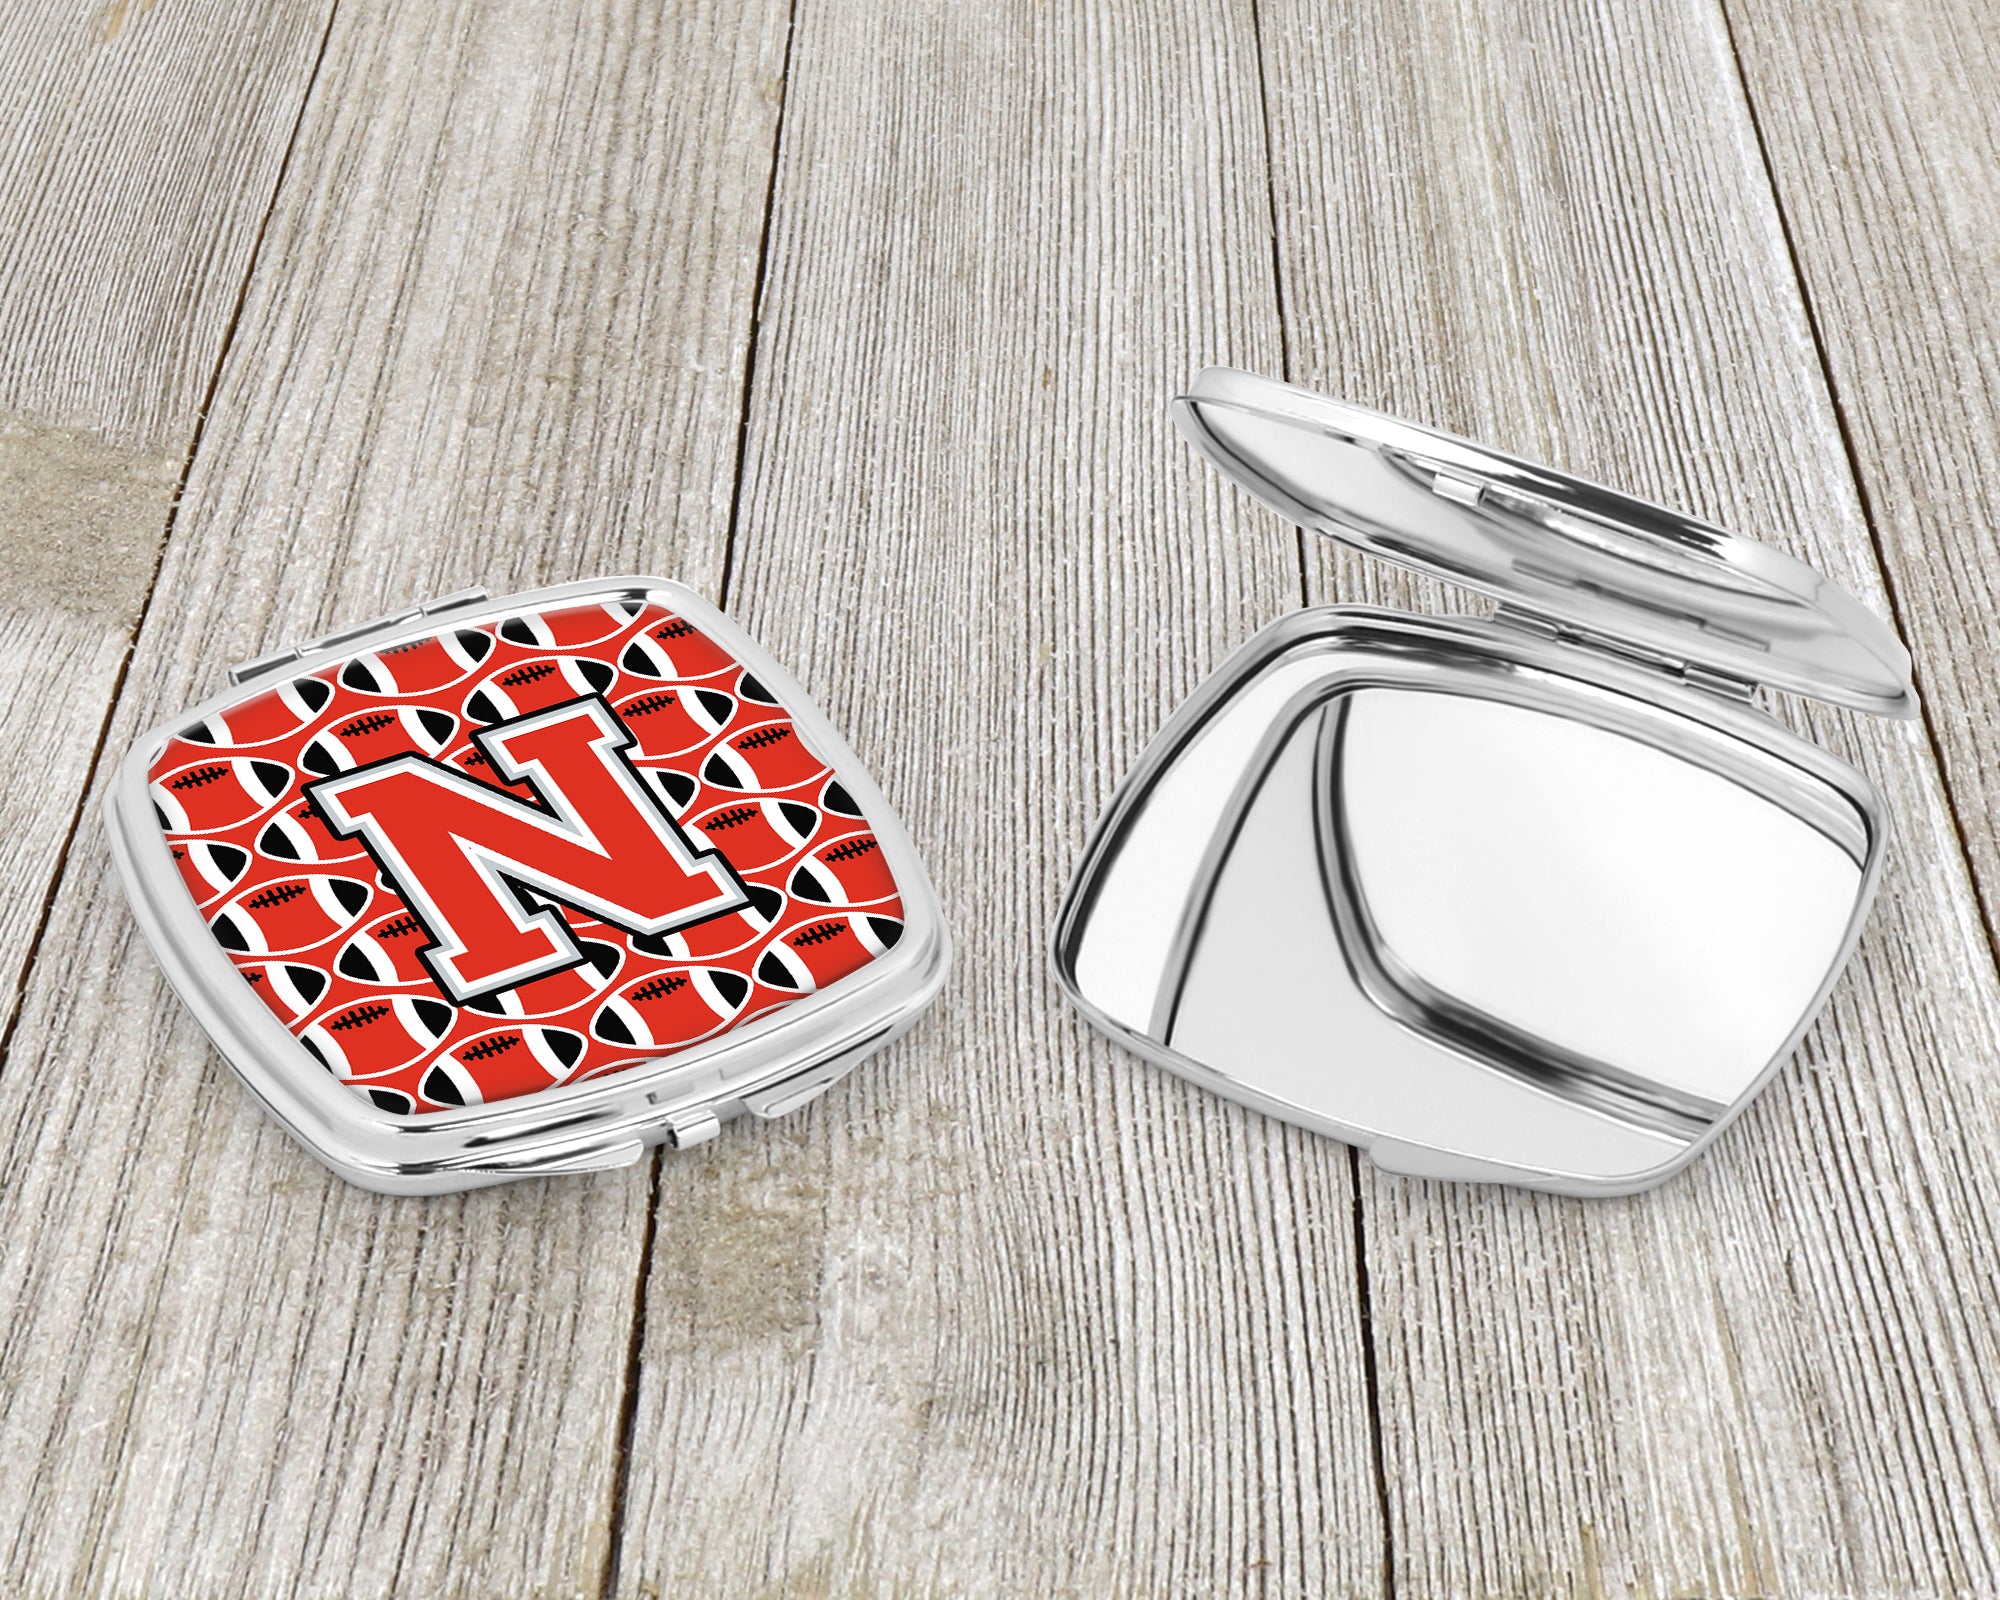 Letter N Football Scarlet and Grey Compact Mirror CJ1067-NSCM  the-store.com.